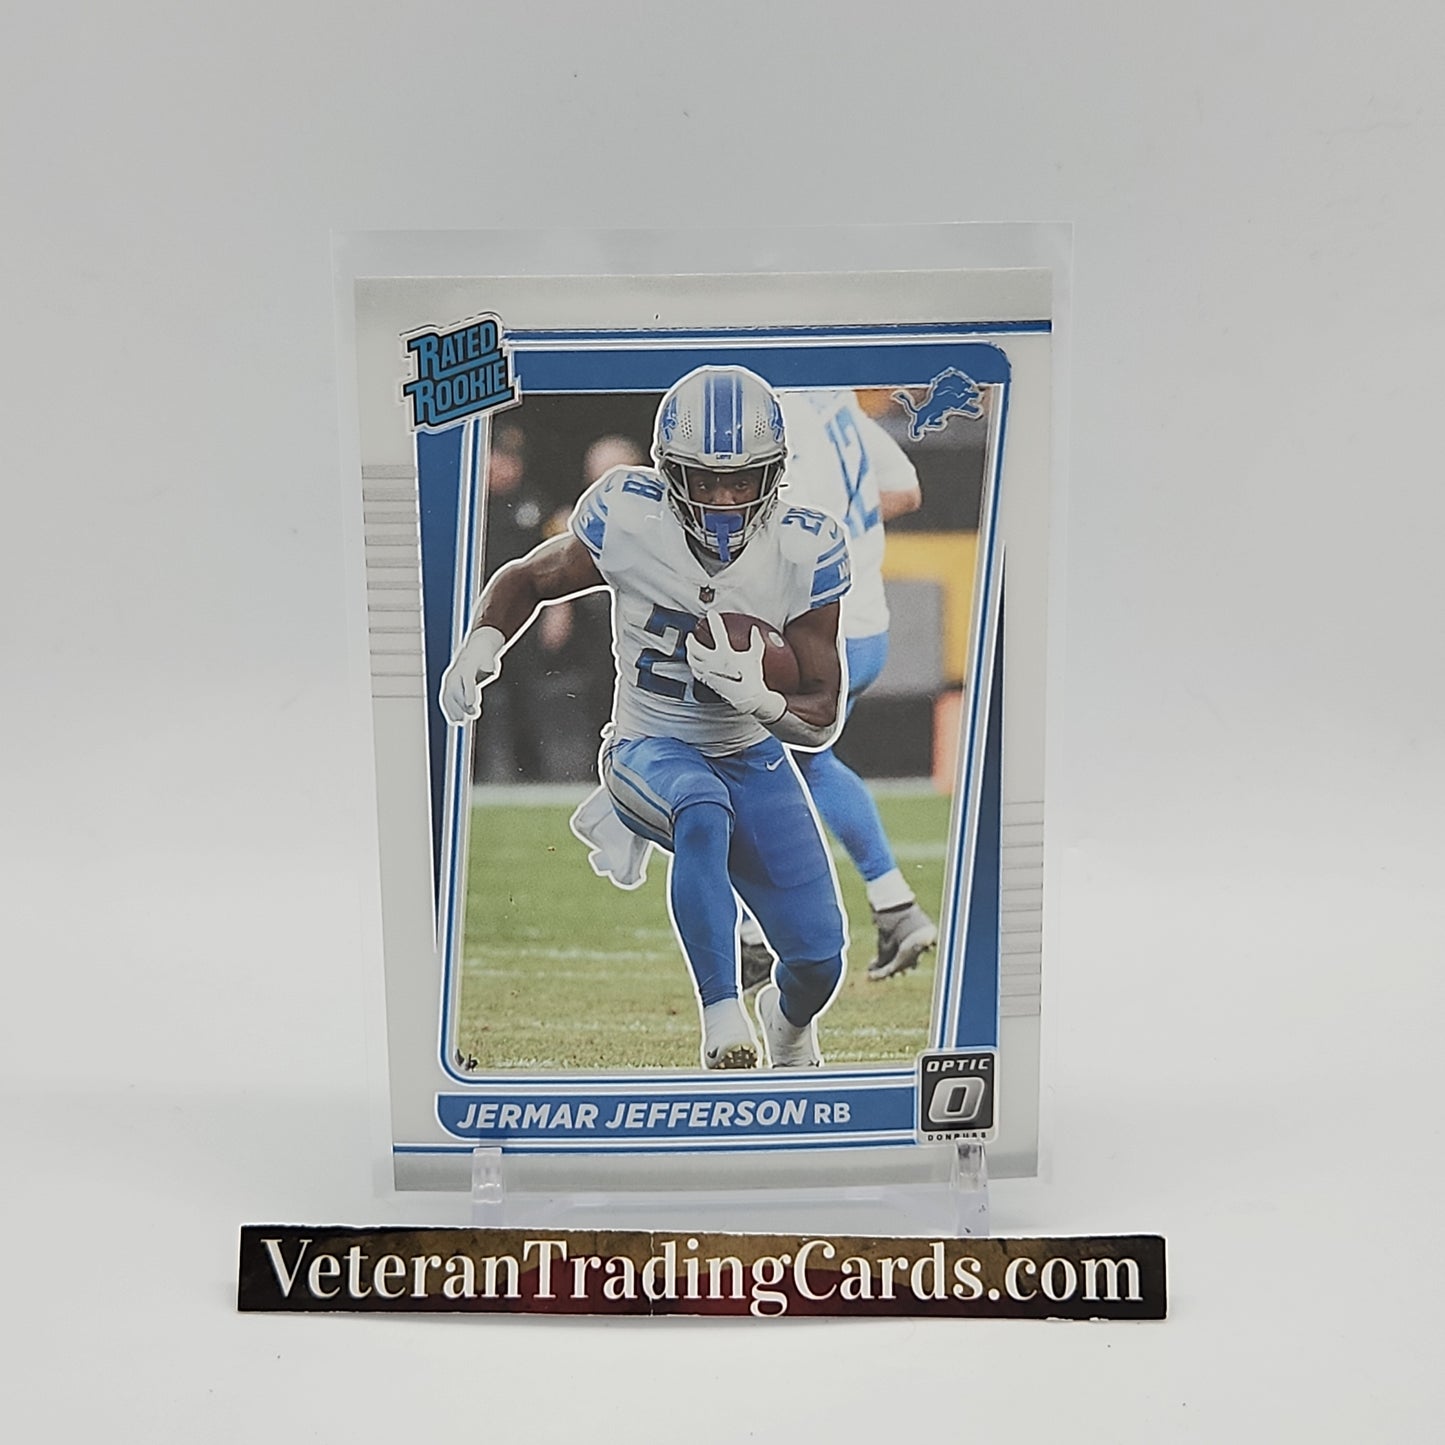 Jermar Jefferson Rated Rookie Optic Card #296